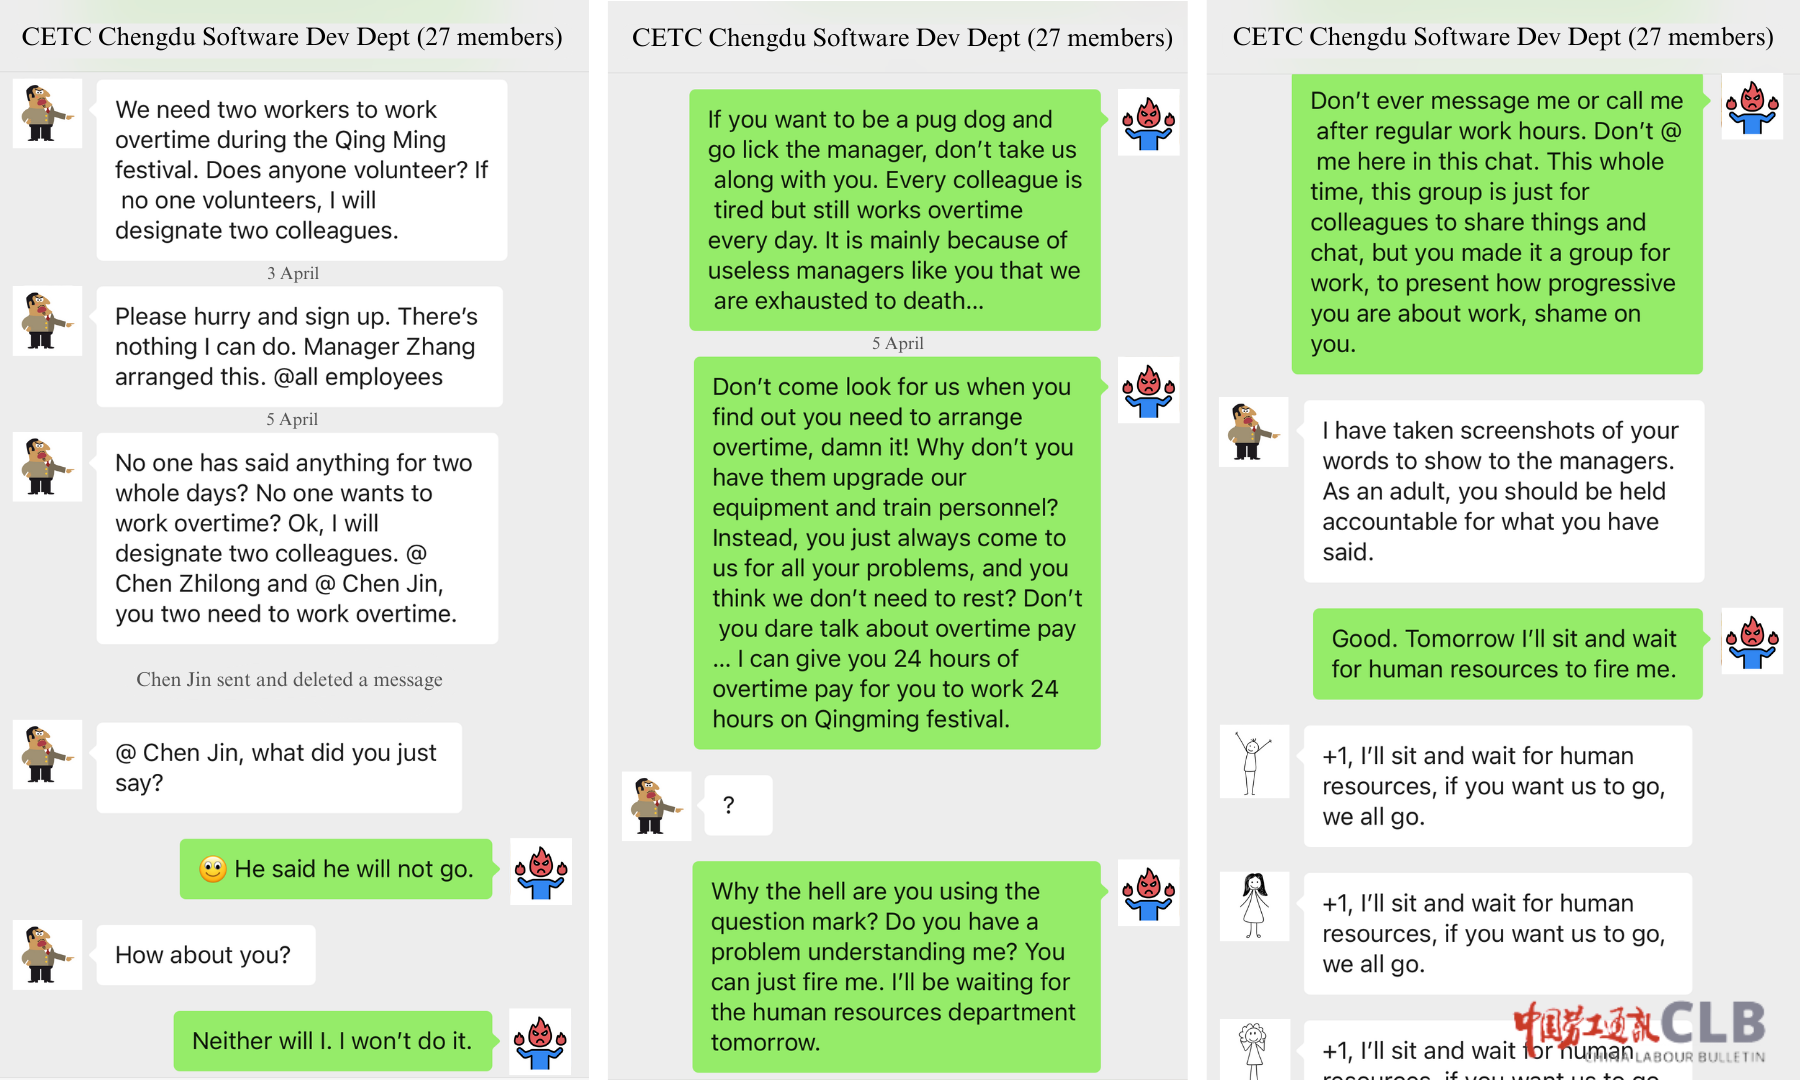 CLB’s translation and rendering of chat messages shared online